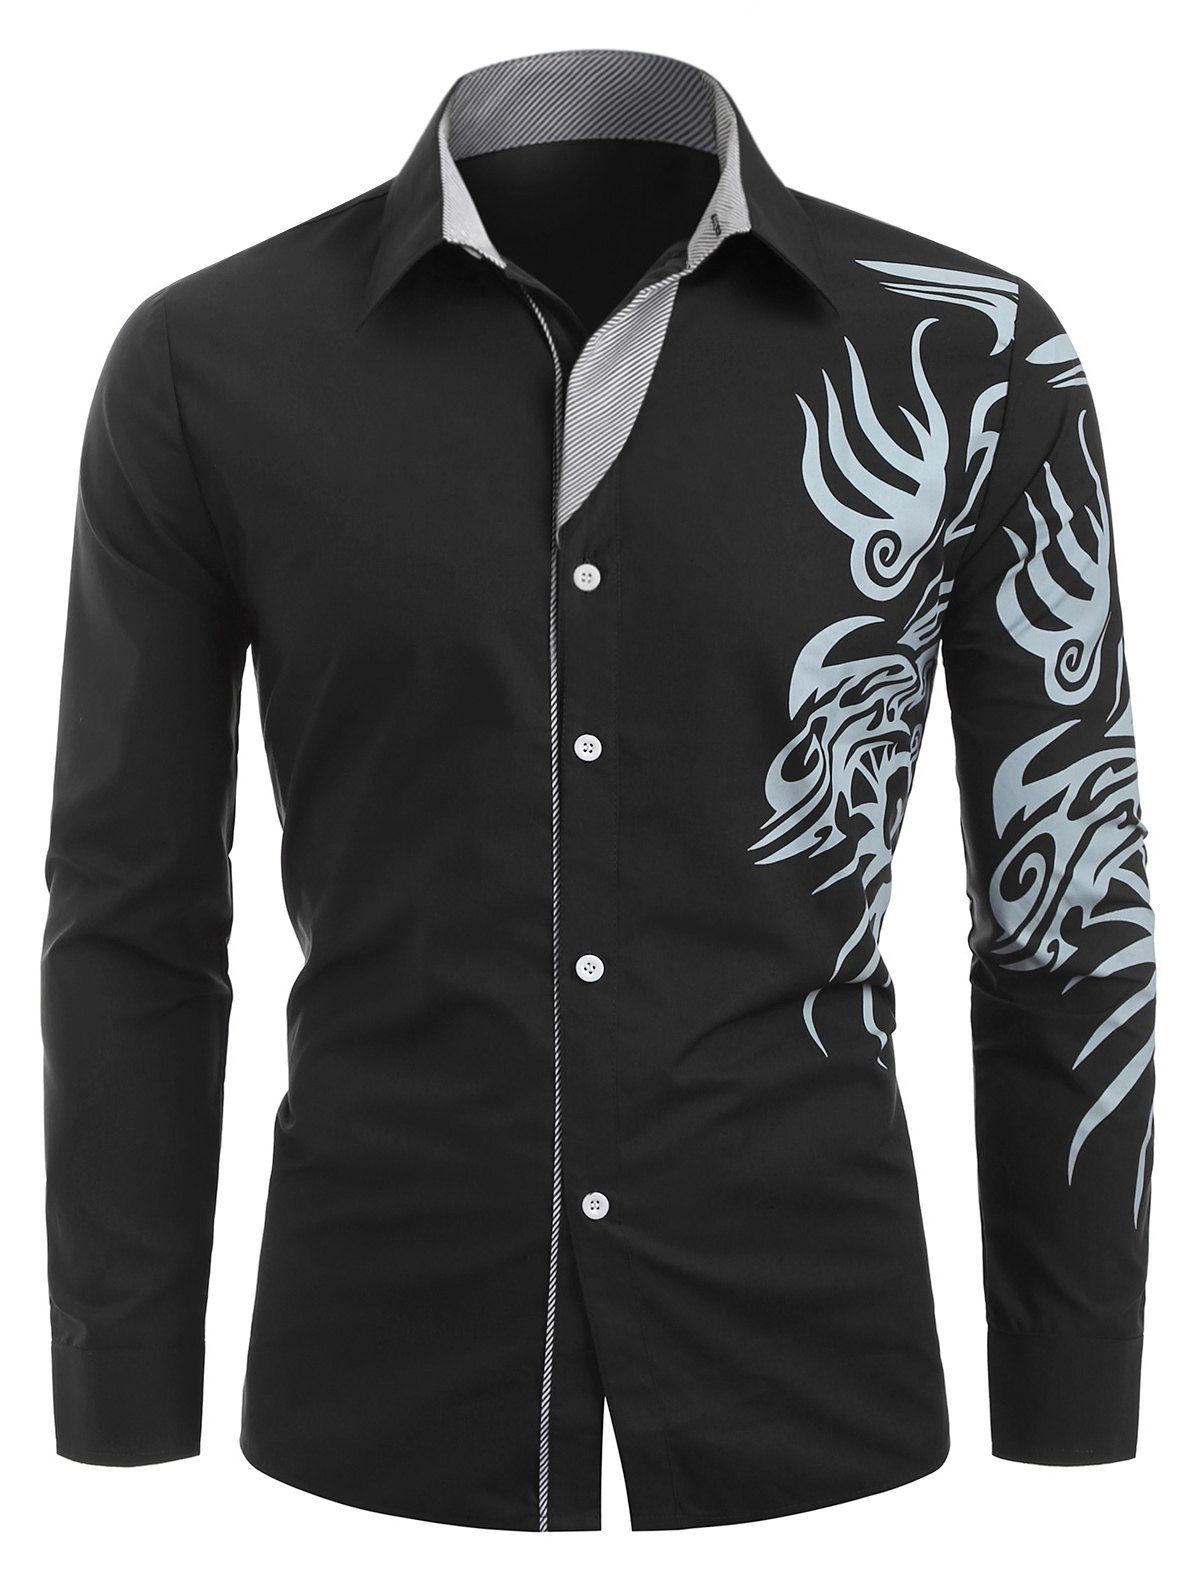 [23% OFF] 2020 Tattoo Print Button Up Long Sleeve Shirt In BLACK ...